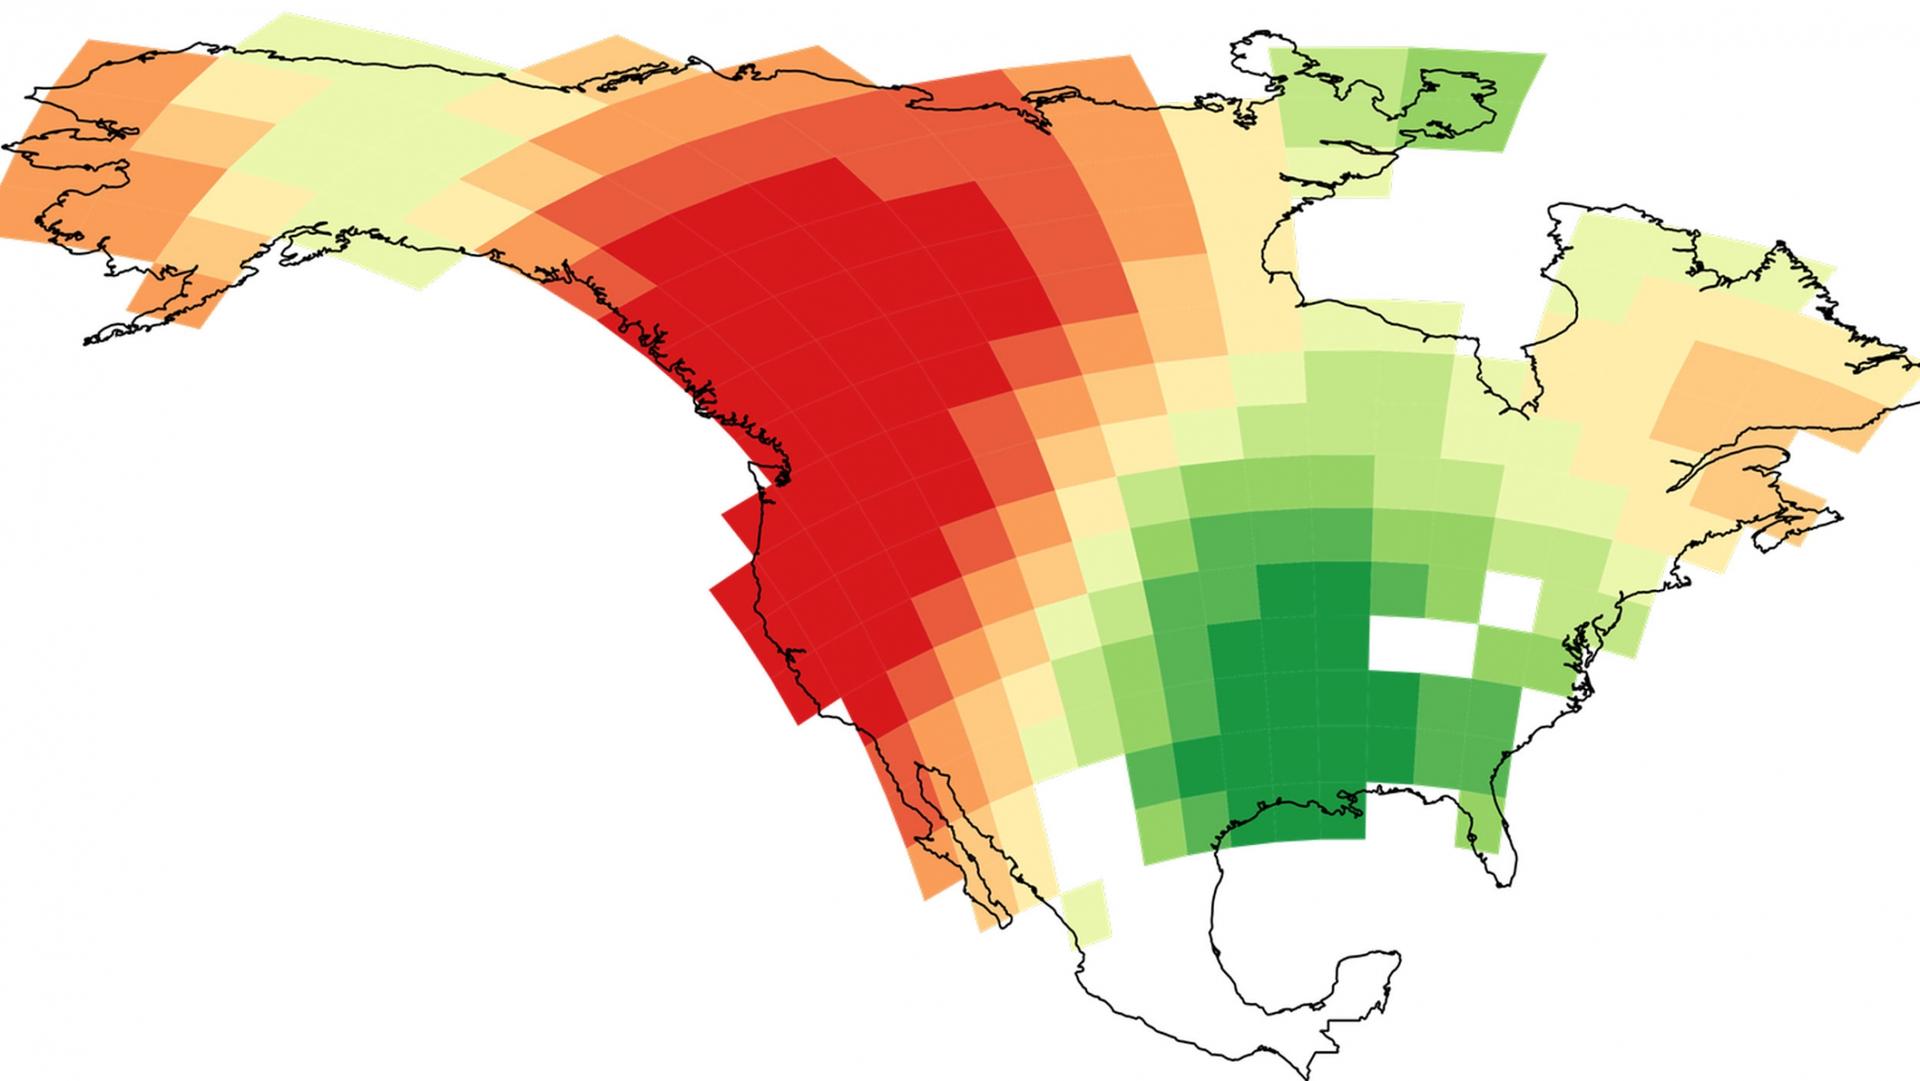 The model’s ability to predict the number of languages varied from excellent in some places (red) to poor in others (green)